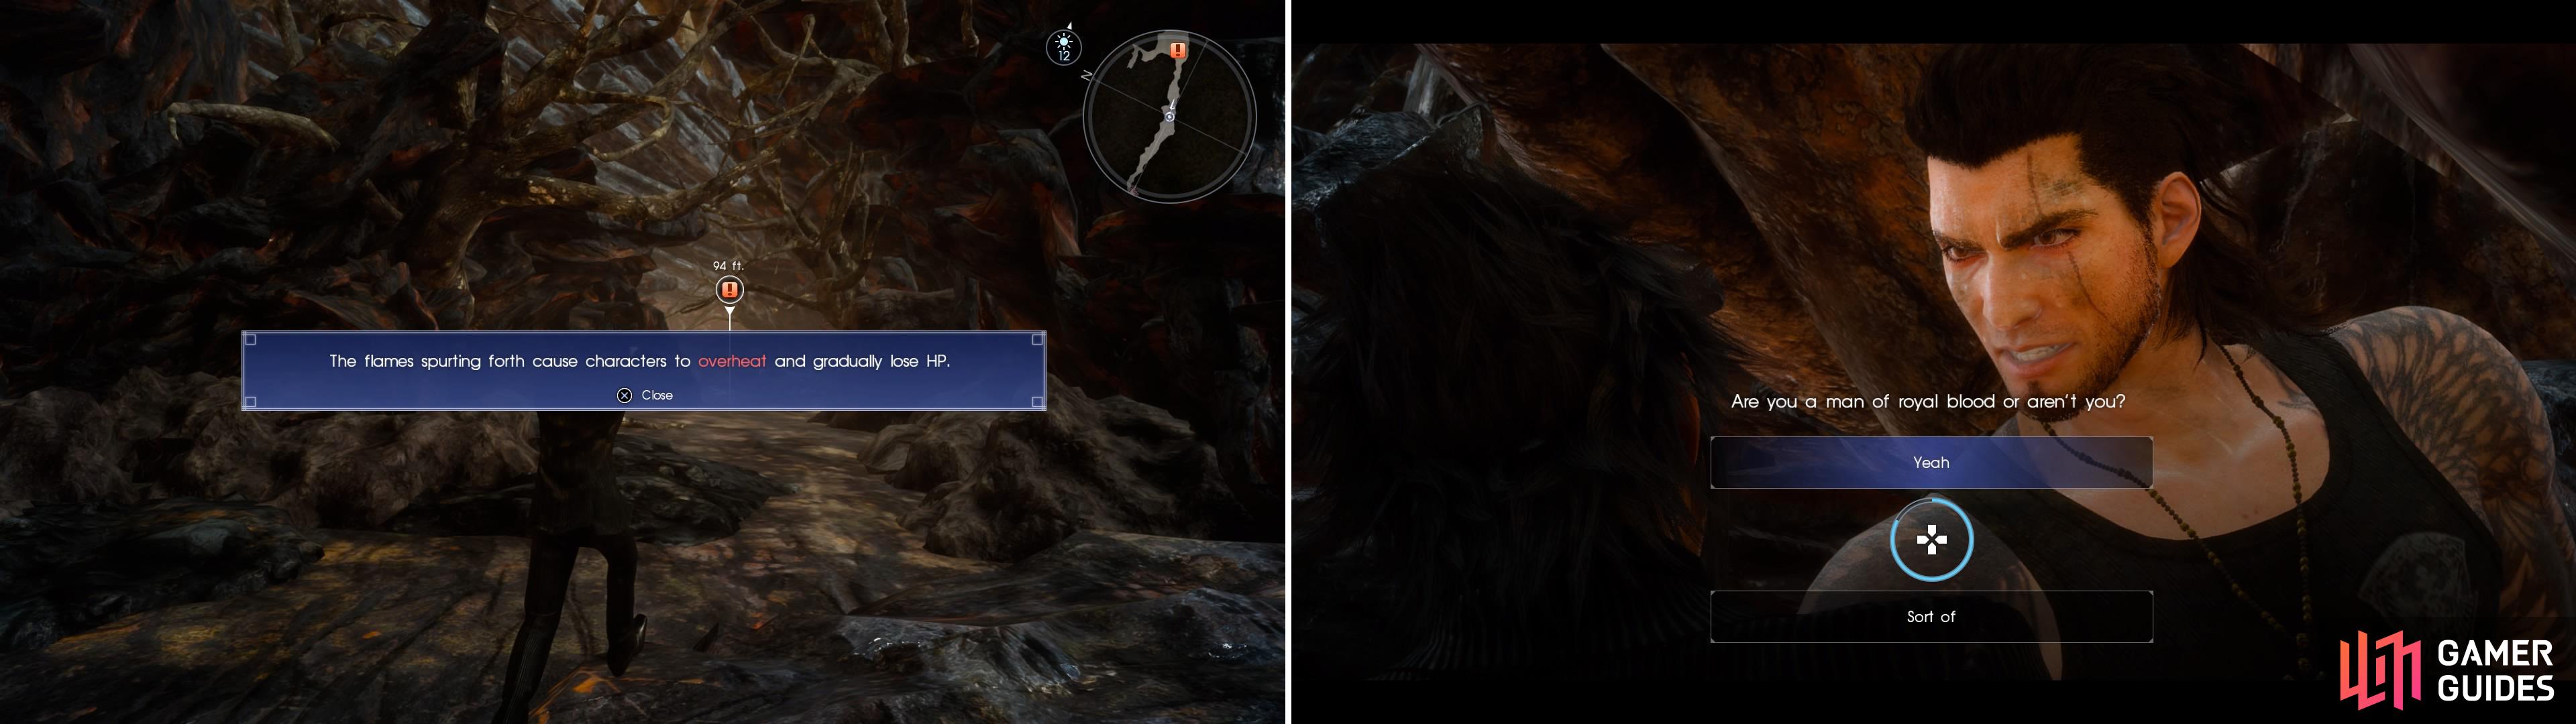 Stay out of the flames as much as you can (left) or your characters will lose HP. A bit further along, answer “Yes” to Gladiolus to get a Strength boost (right) or “Sort of” to get a Vitality boost.